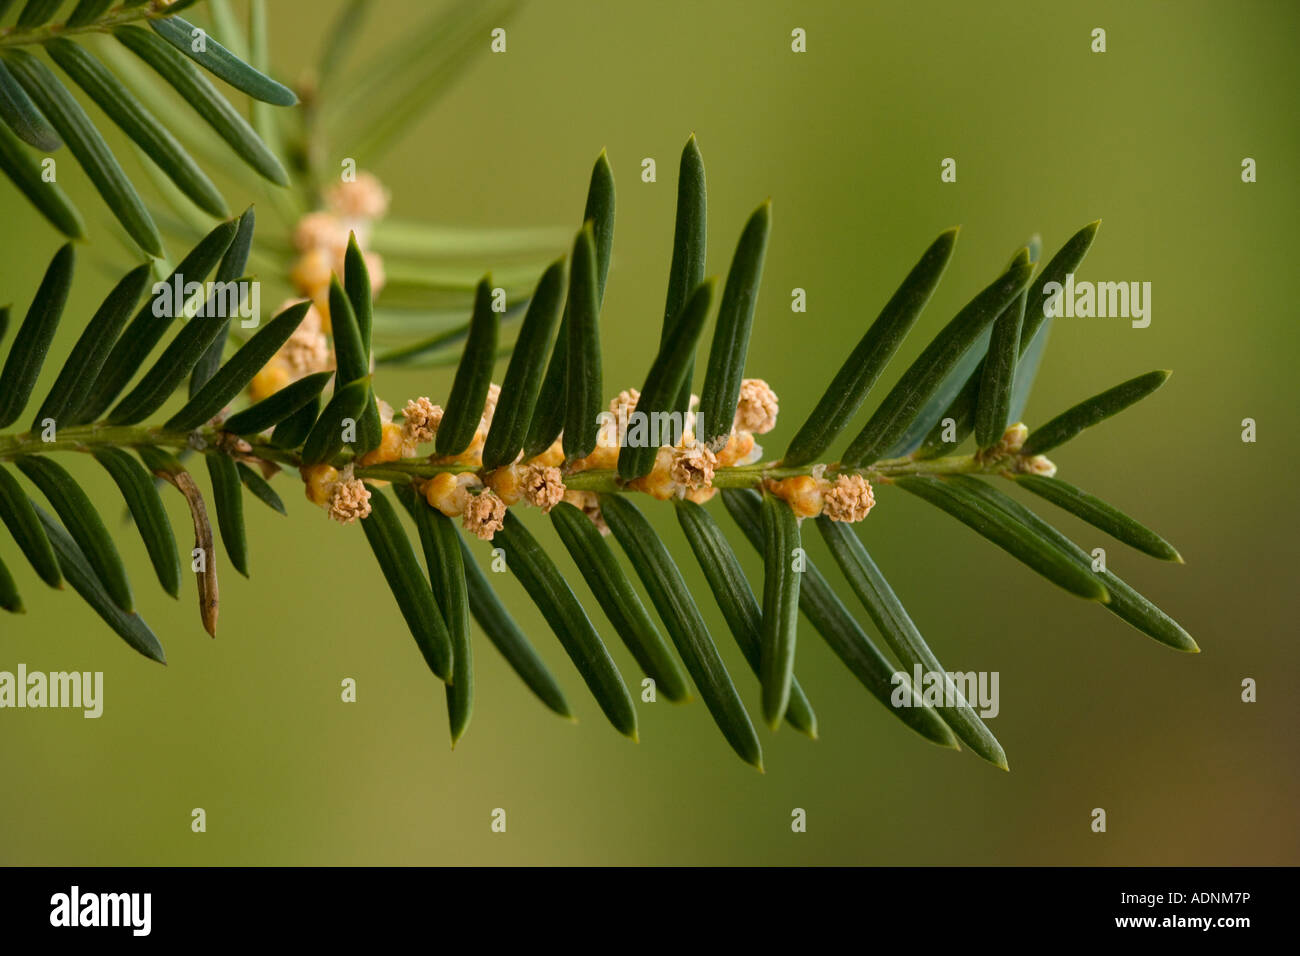 Common yew (Taxus baccata) male flowers, close-up Stock Photo